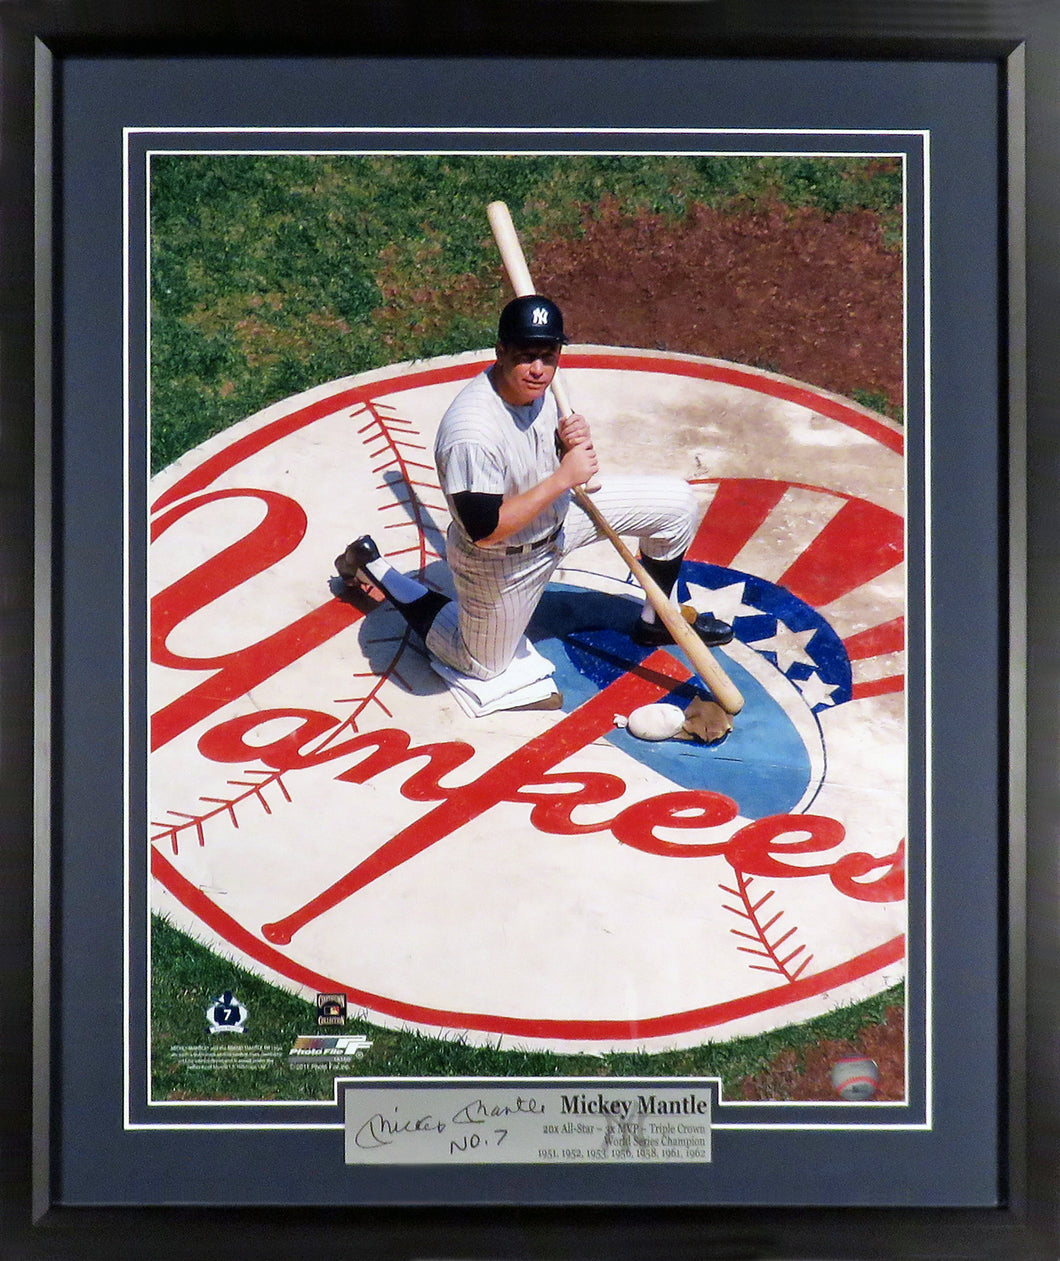 New York Yankees Mickey Mantle 16x20 Framed Photograph (Engraved Series)